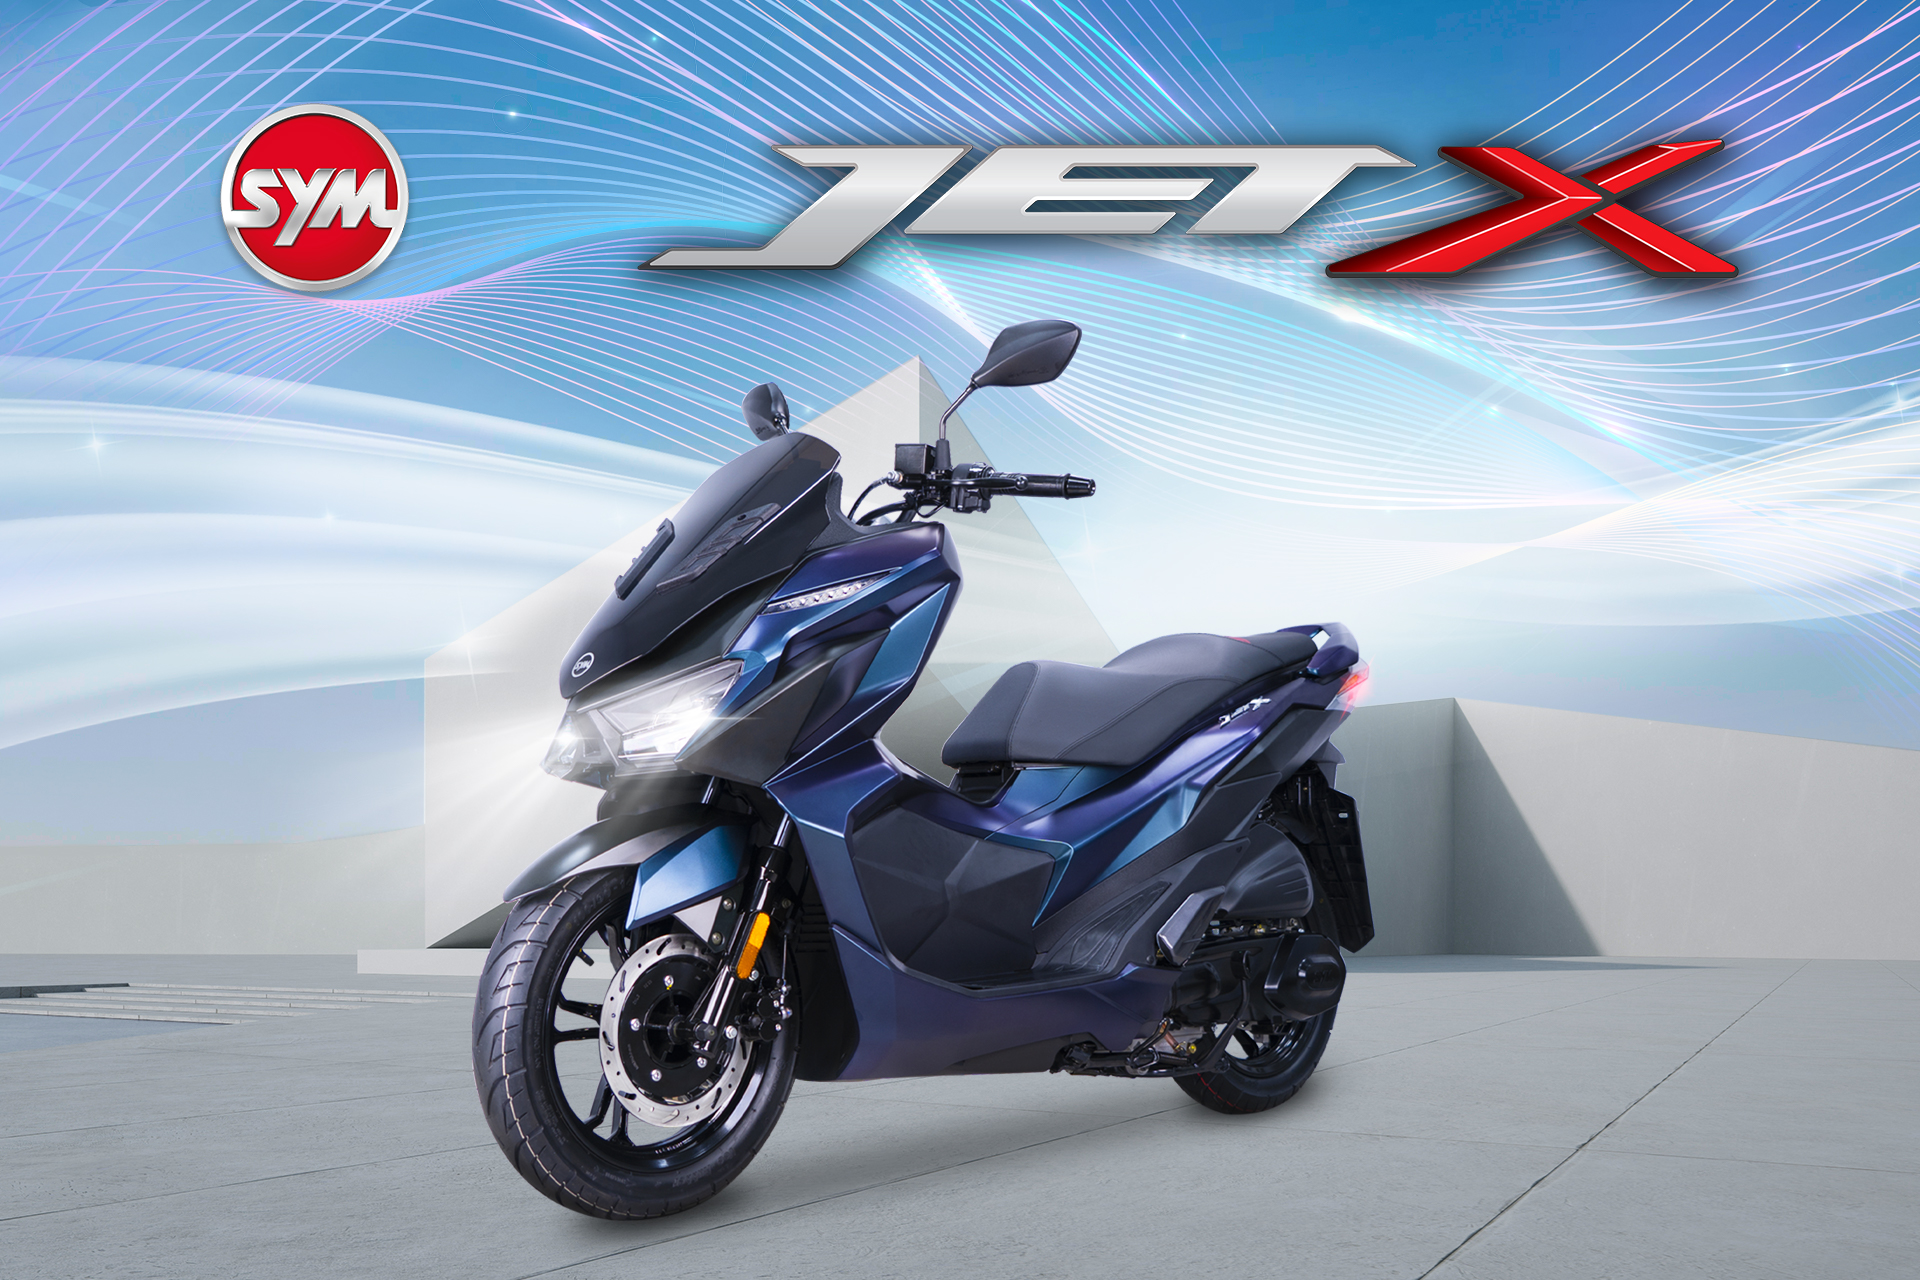 2021 SYM Jet X 150 launched in Malaysia - from RM 8,888